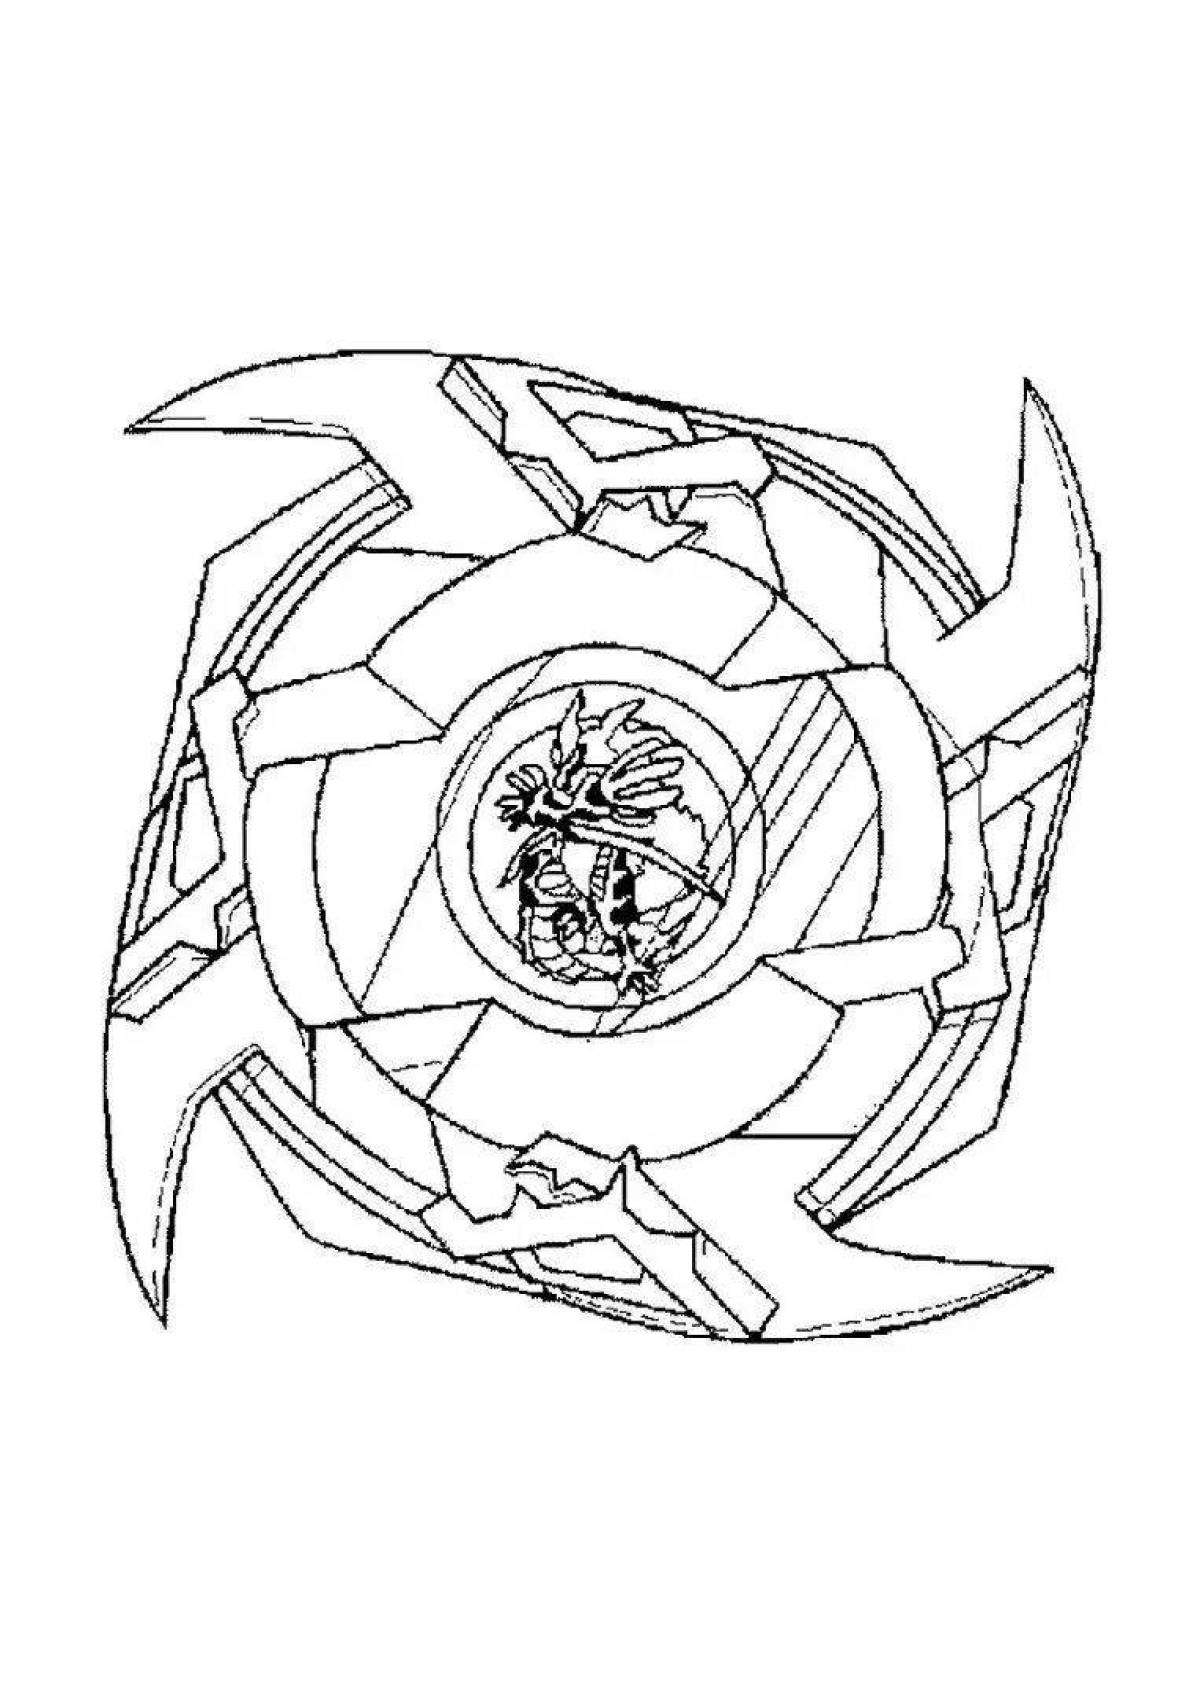 Charming beyblade burst coloring page